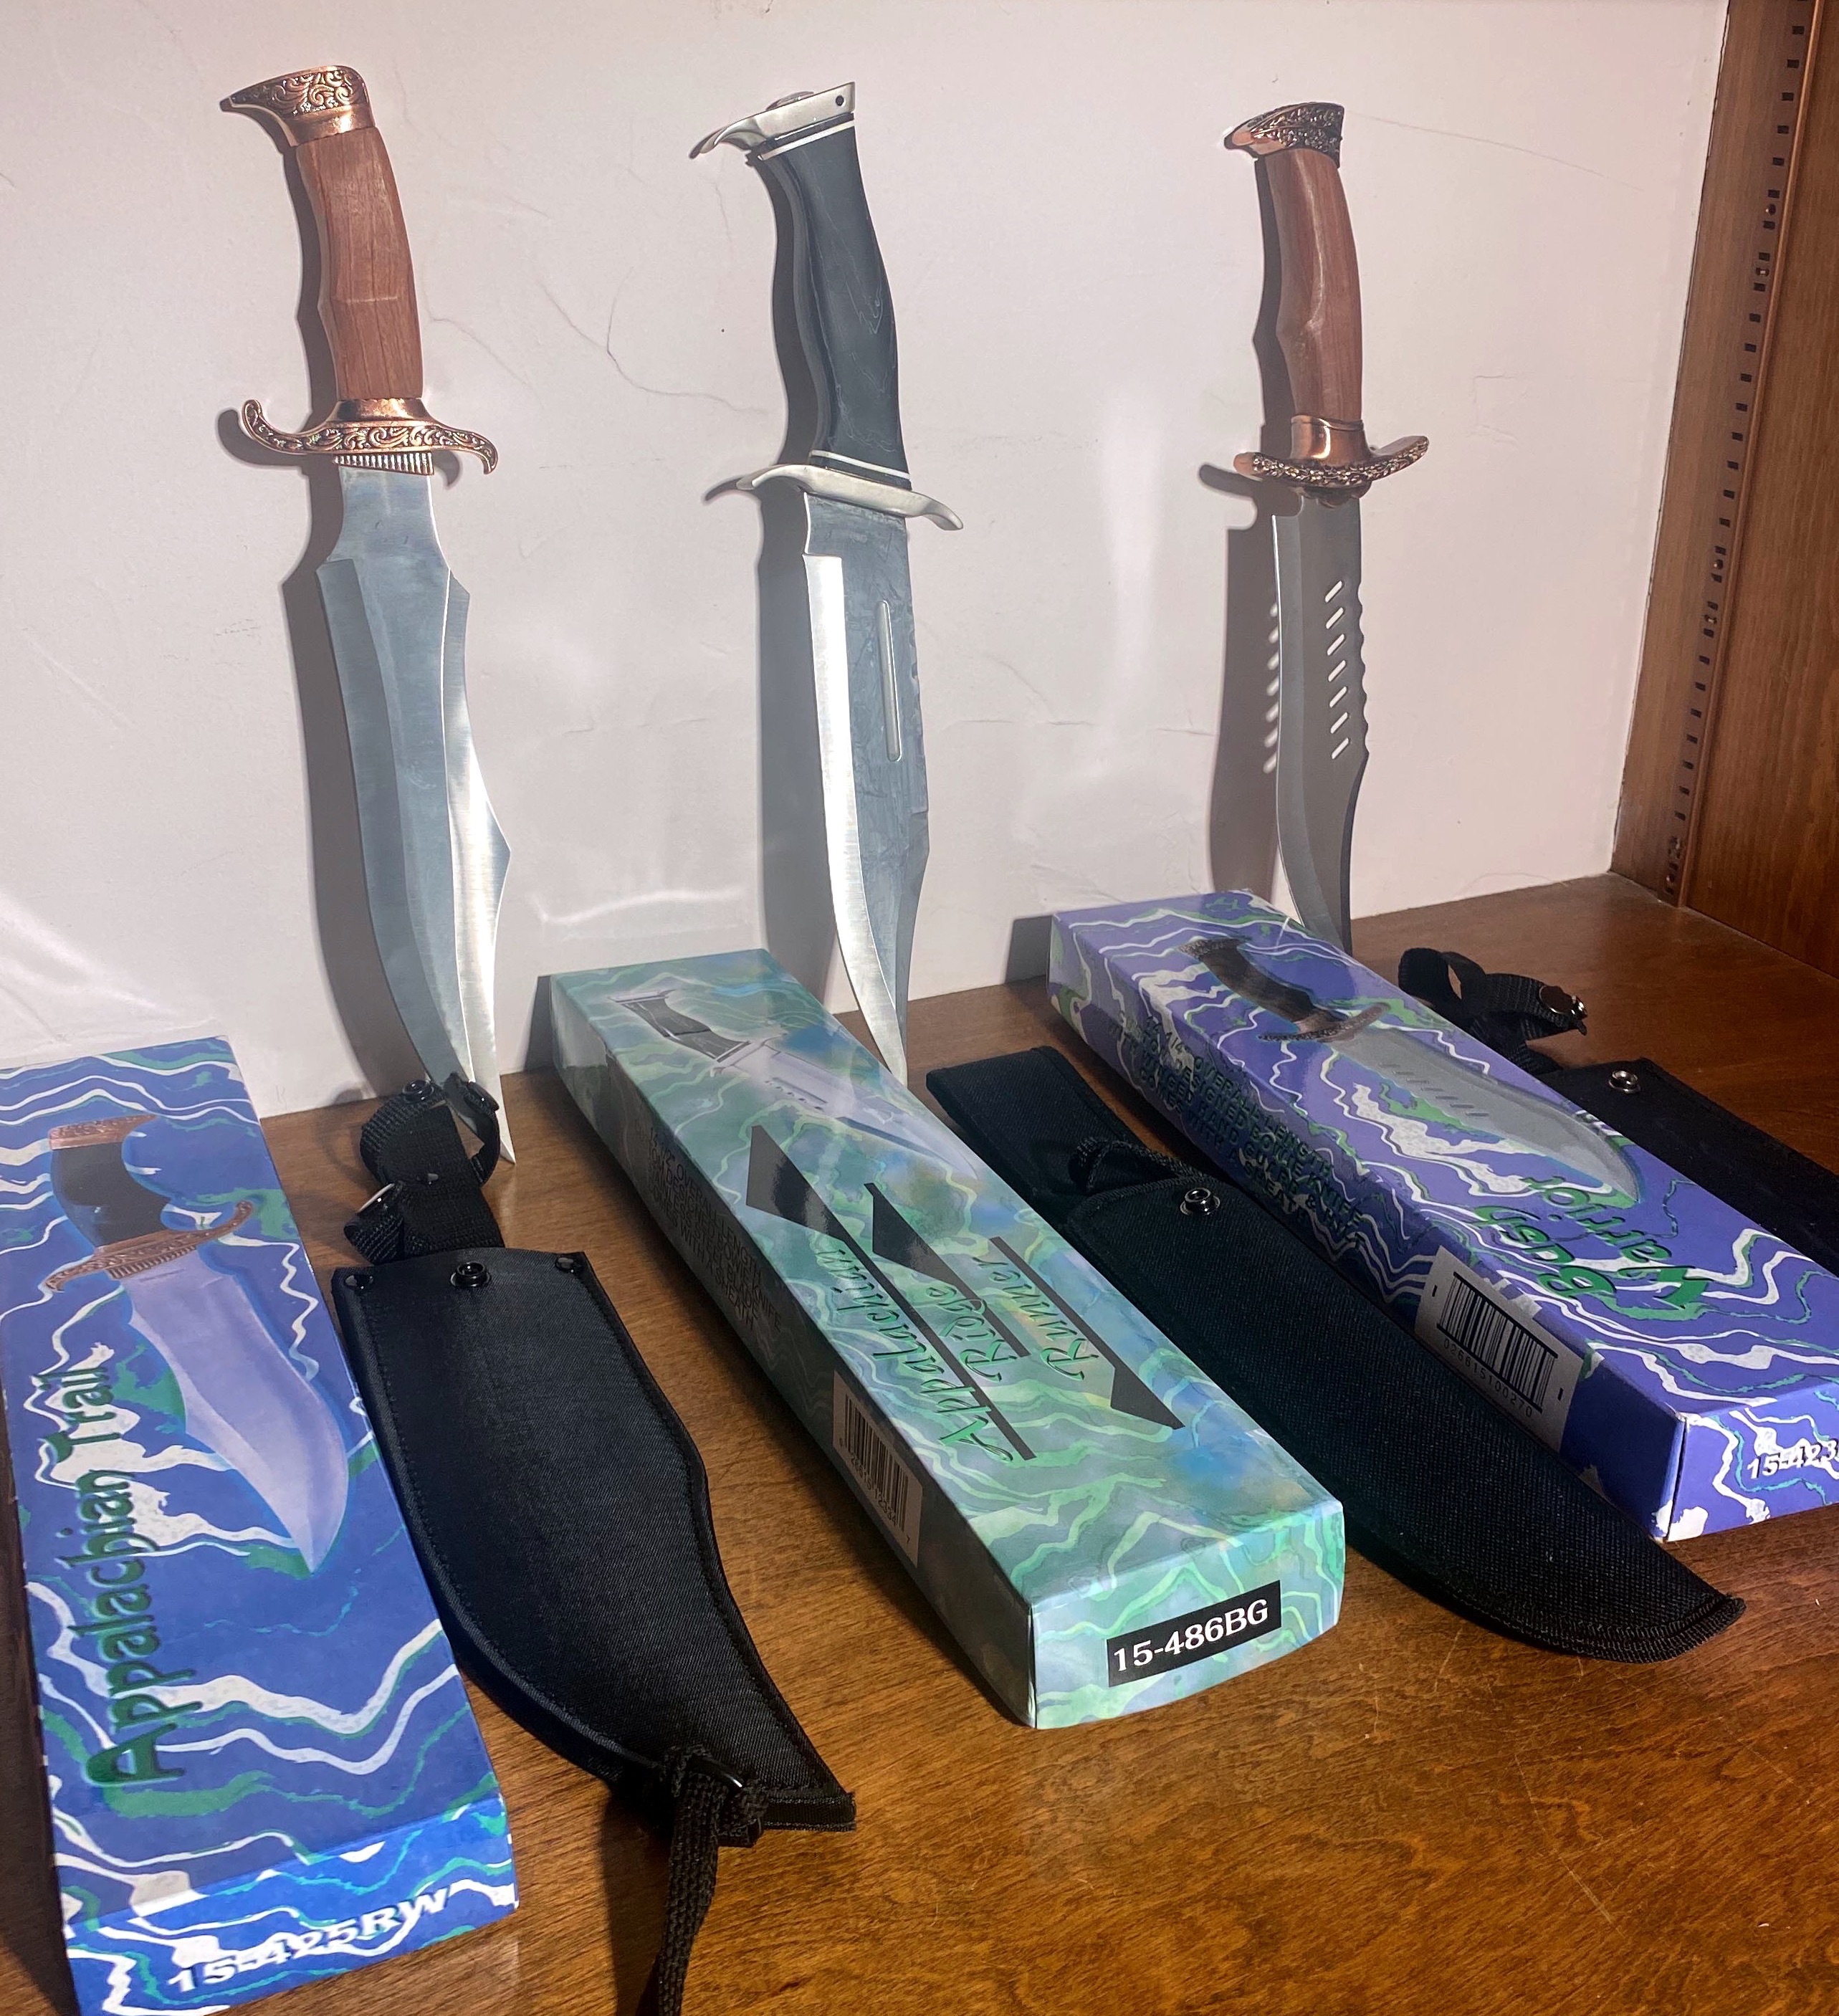 NM Auctions  Innovative Auction, Liquidation & Estate Sales - Miracle Blade  III Perfection Series Knife Set